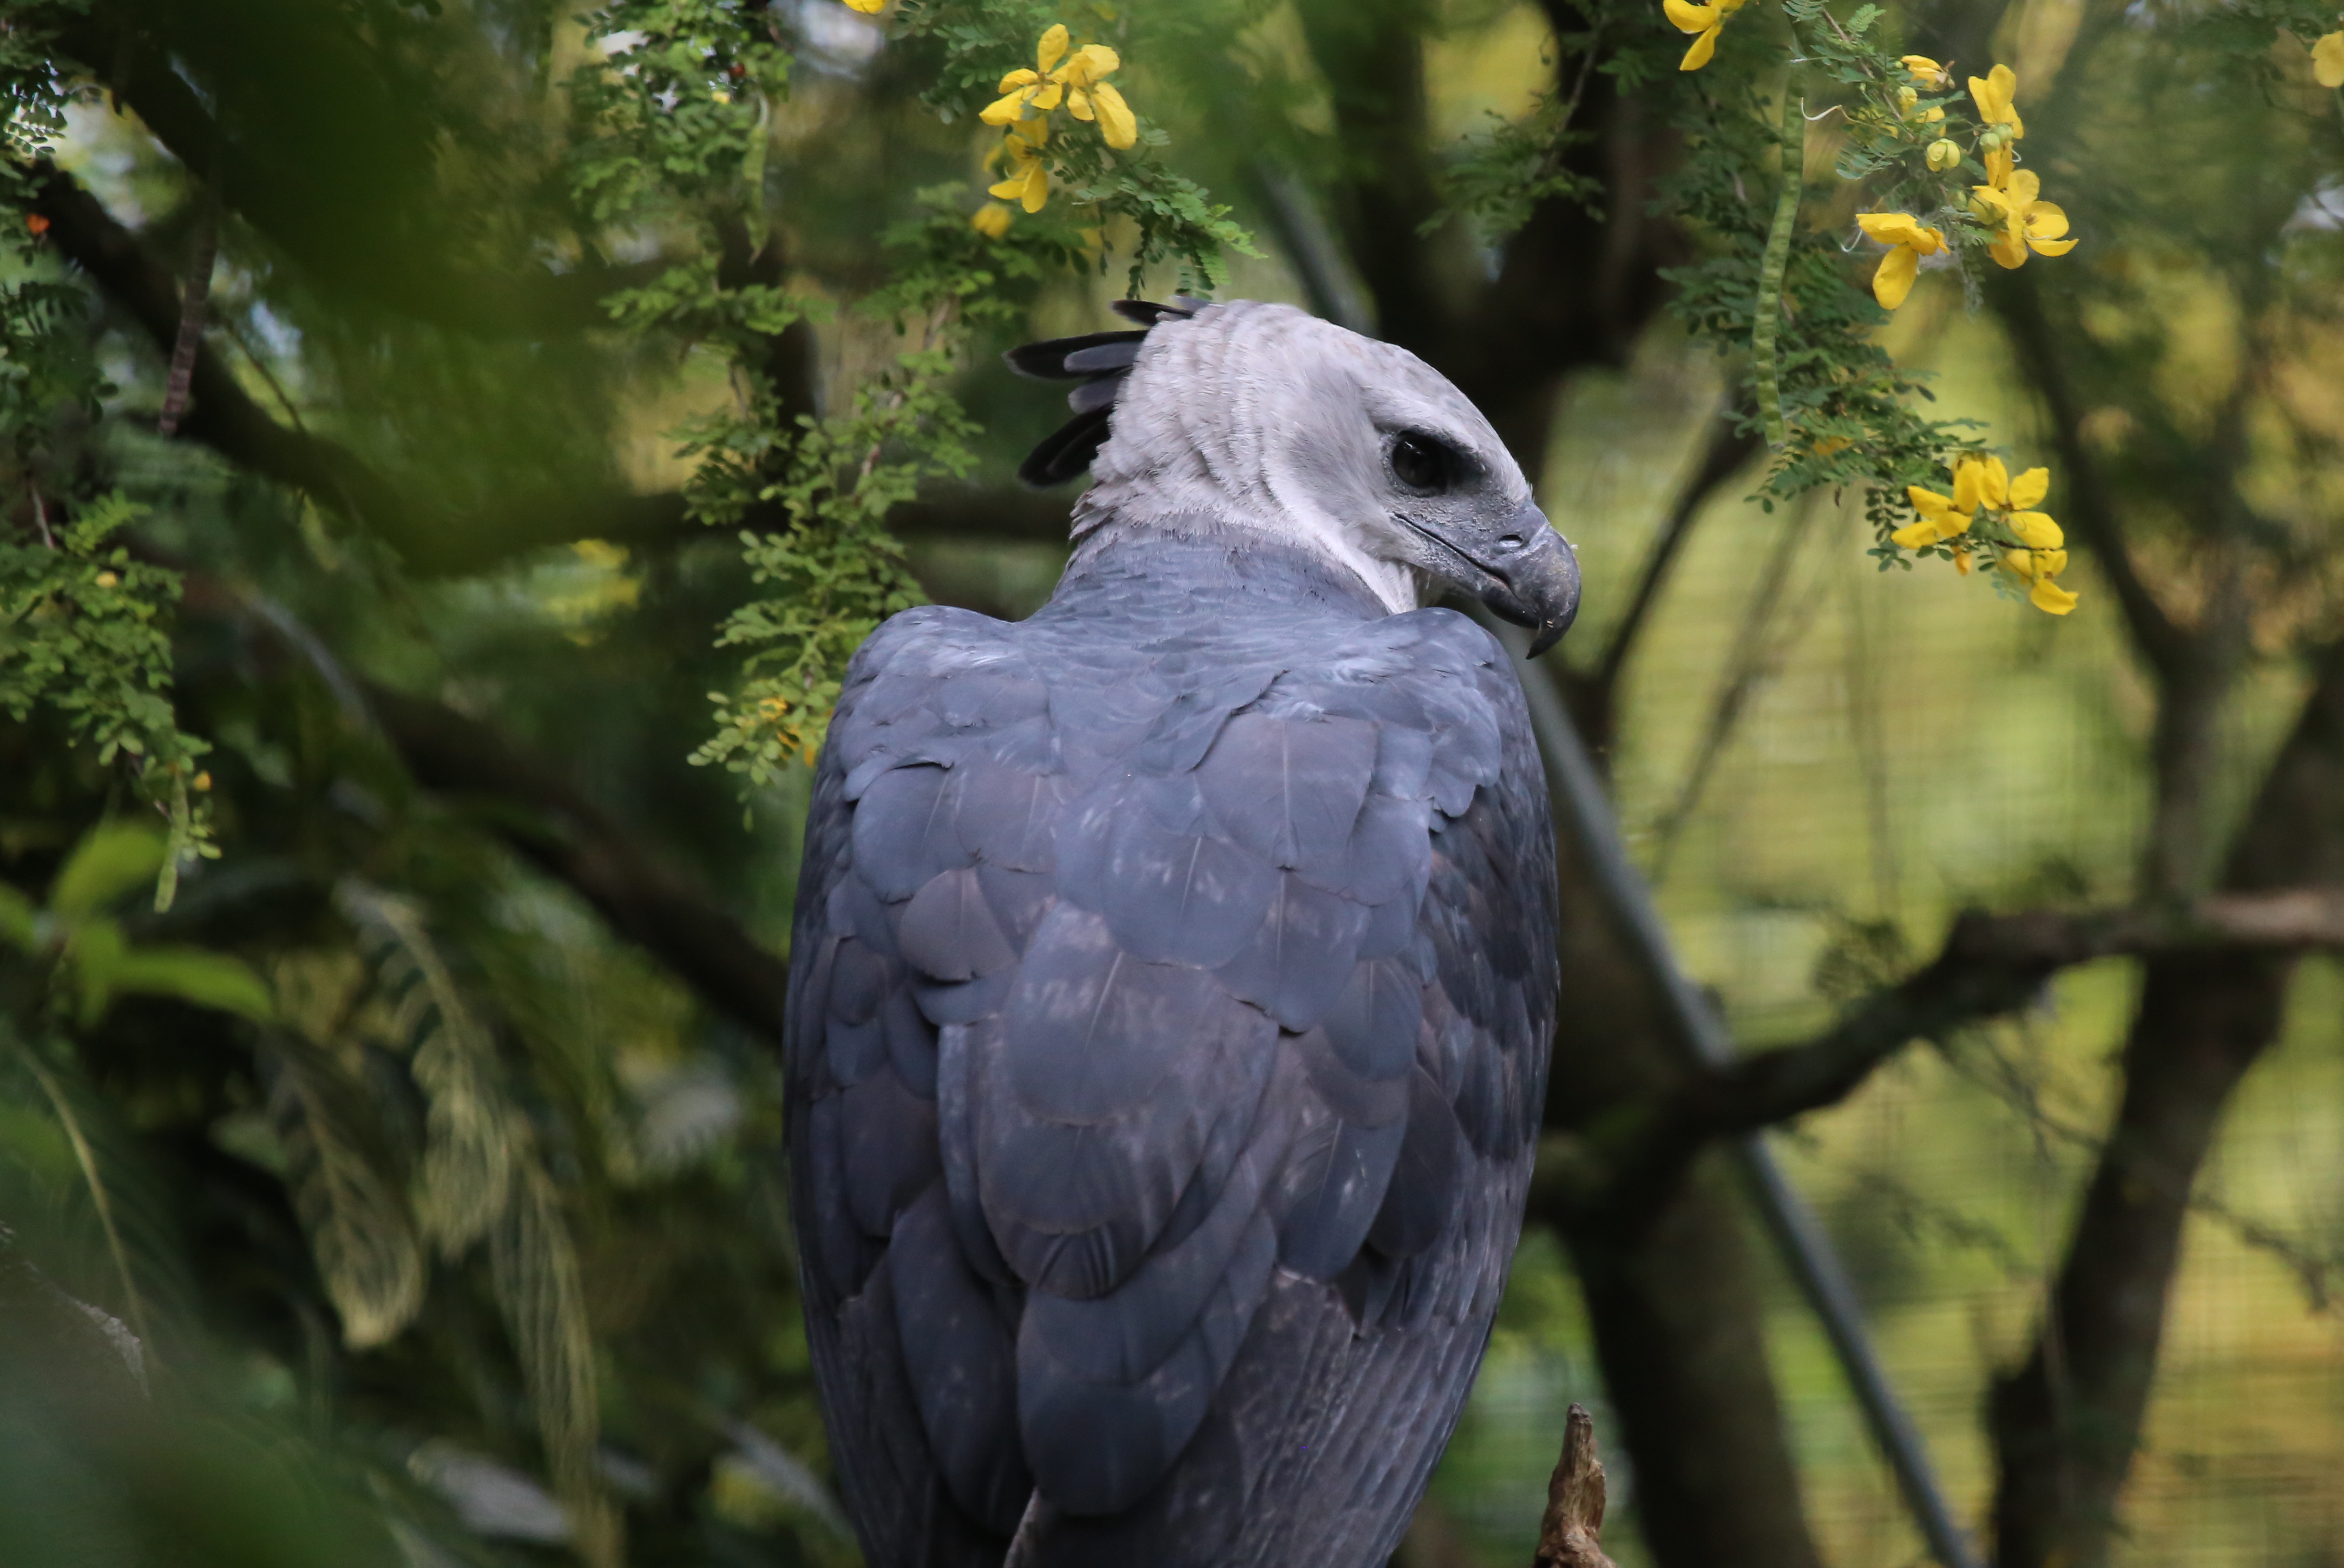 Beautiful perched Harpy Eagle. Photo taken by cuatrok77, published on Flickr 